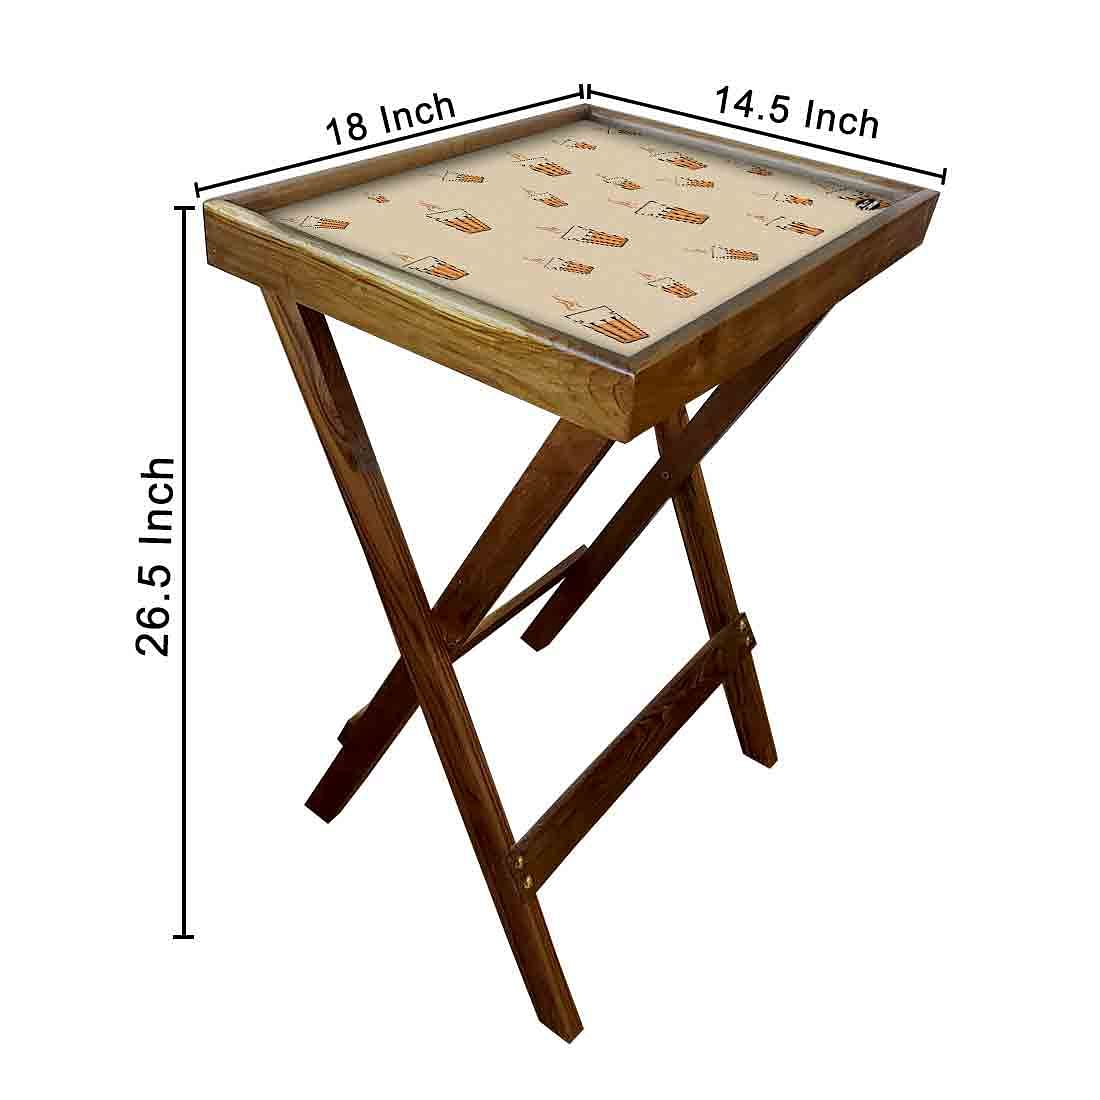 Foldable Side Table for TV Tray Tables Living Room - Tea Nutcase